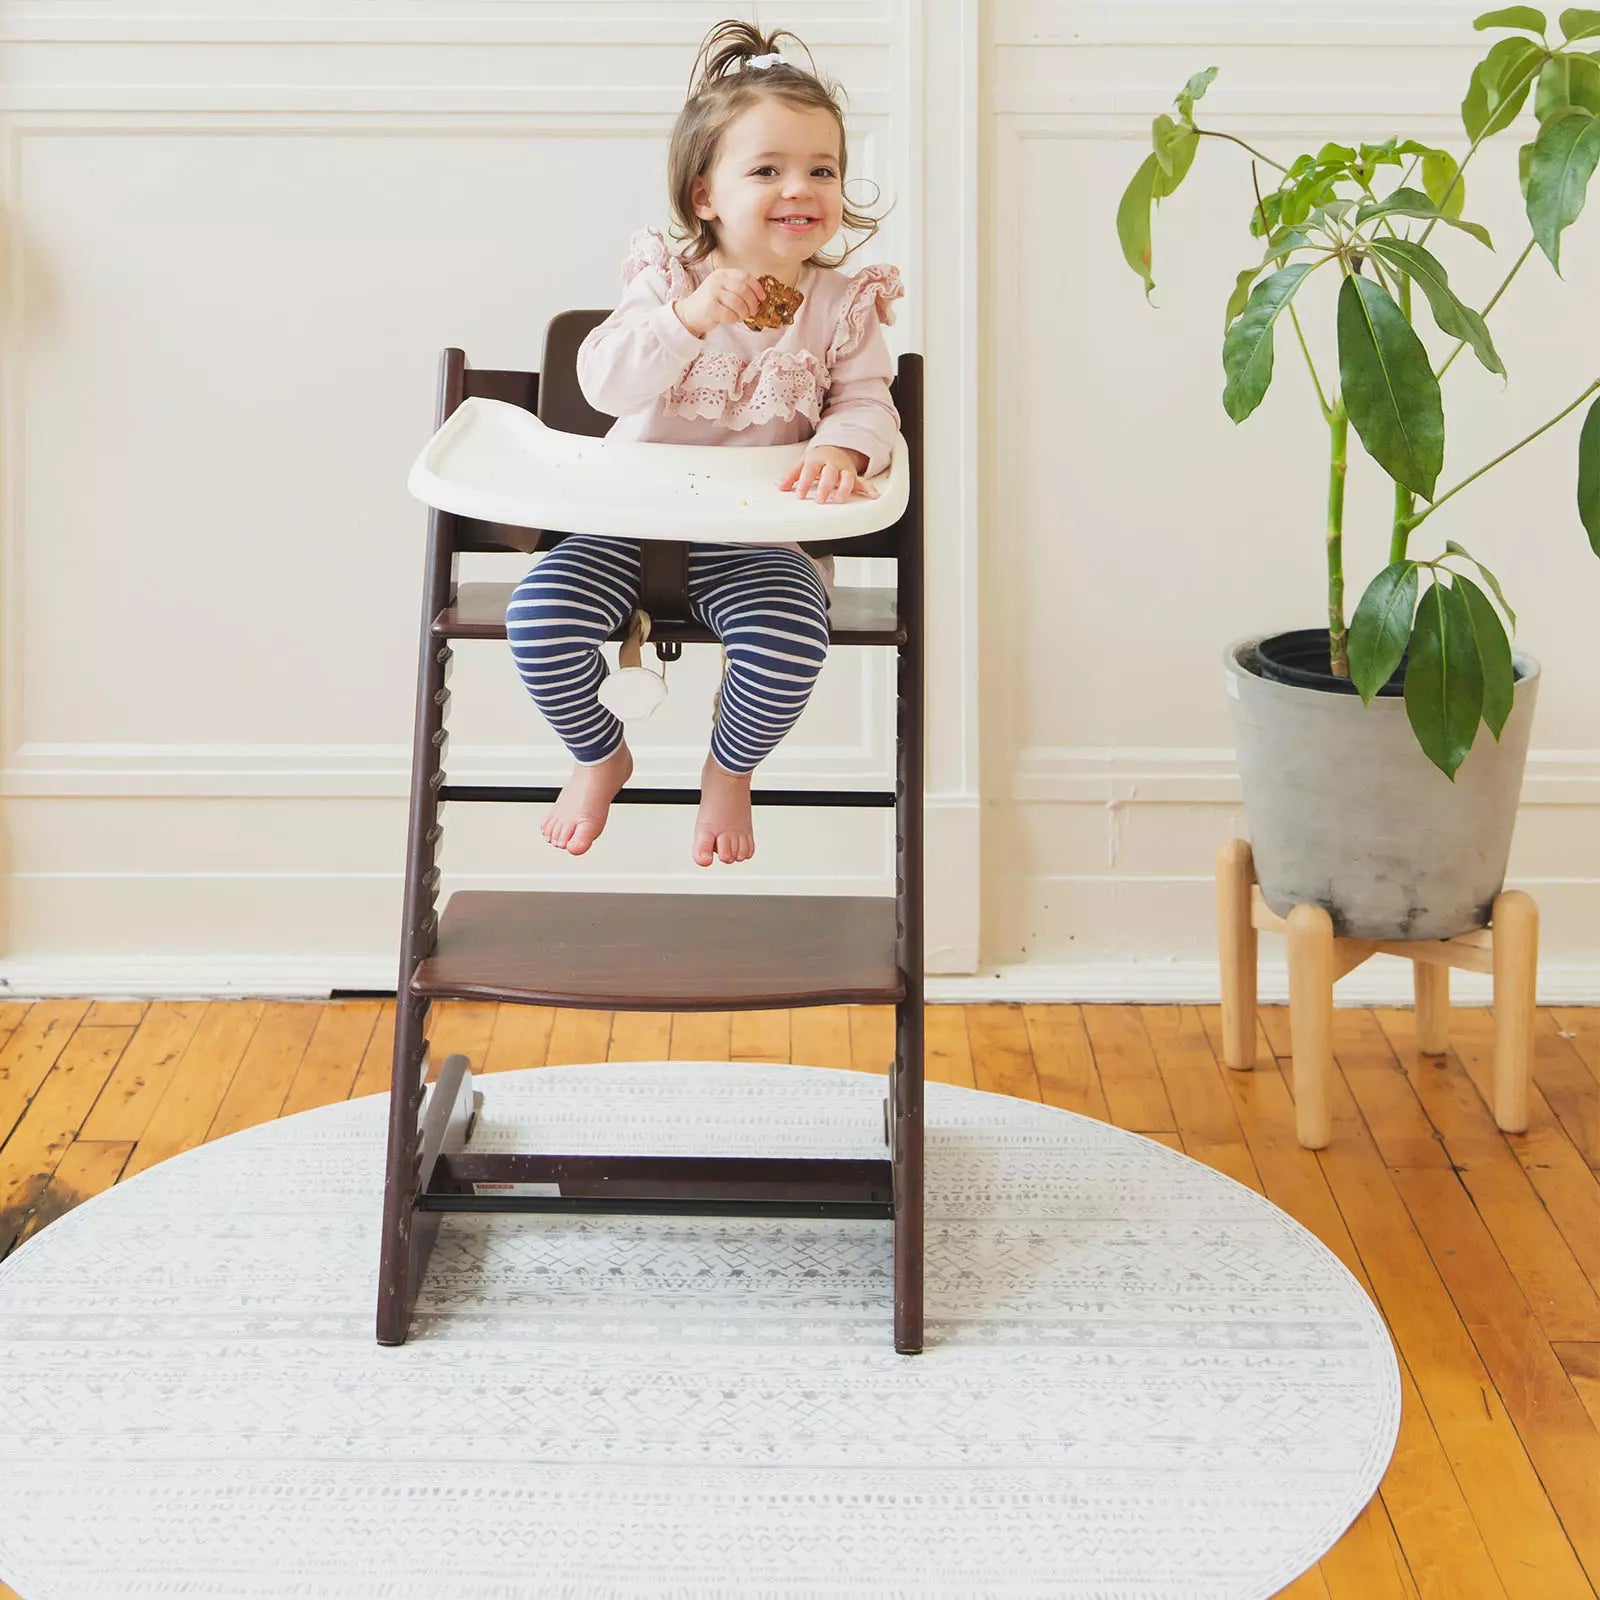 Skipping Stone gray and white striped highchair mat shown under highchair with baby eating